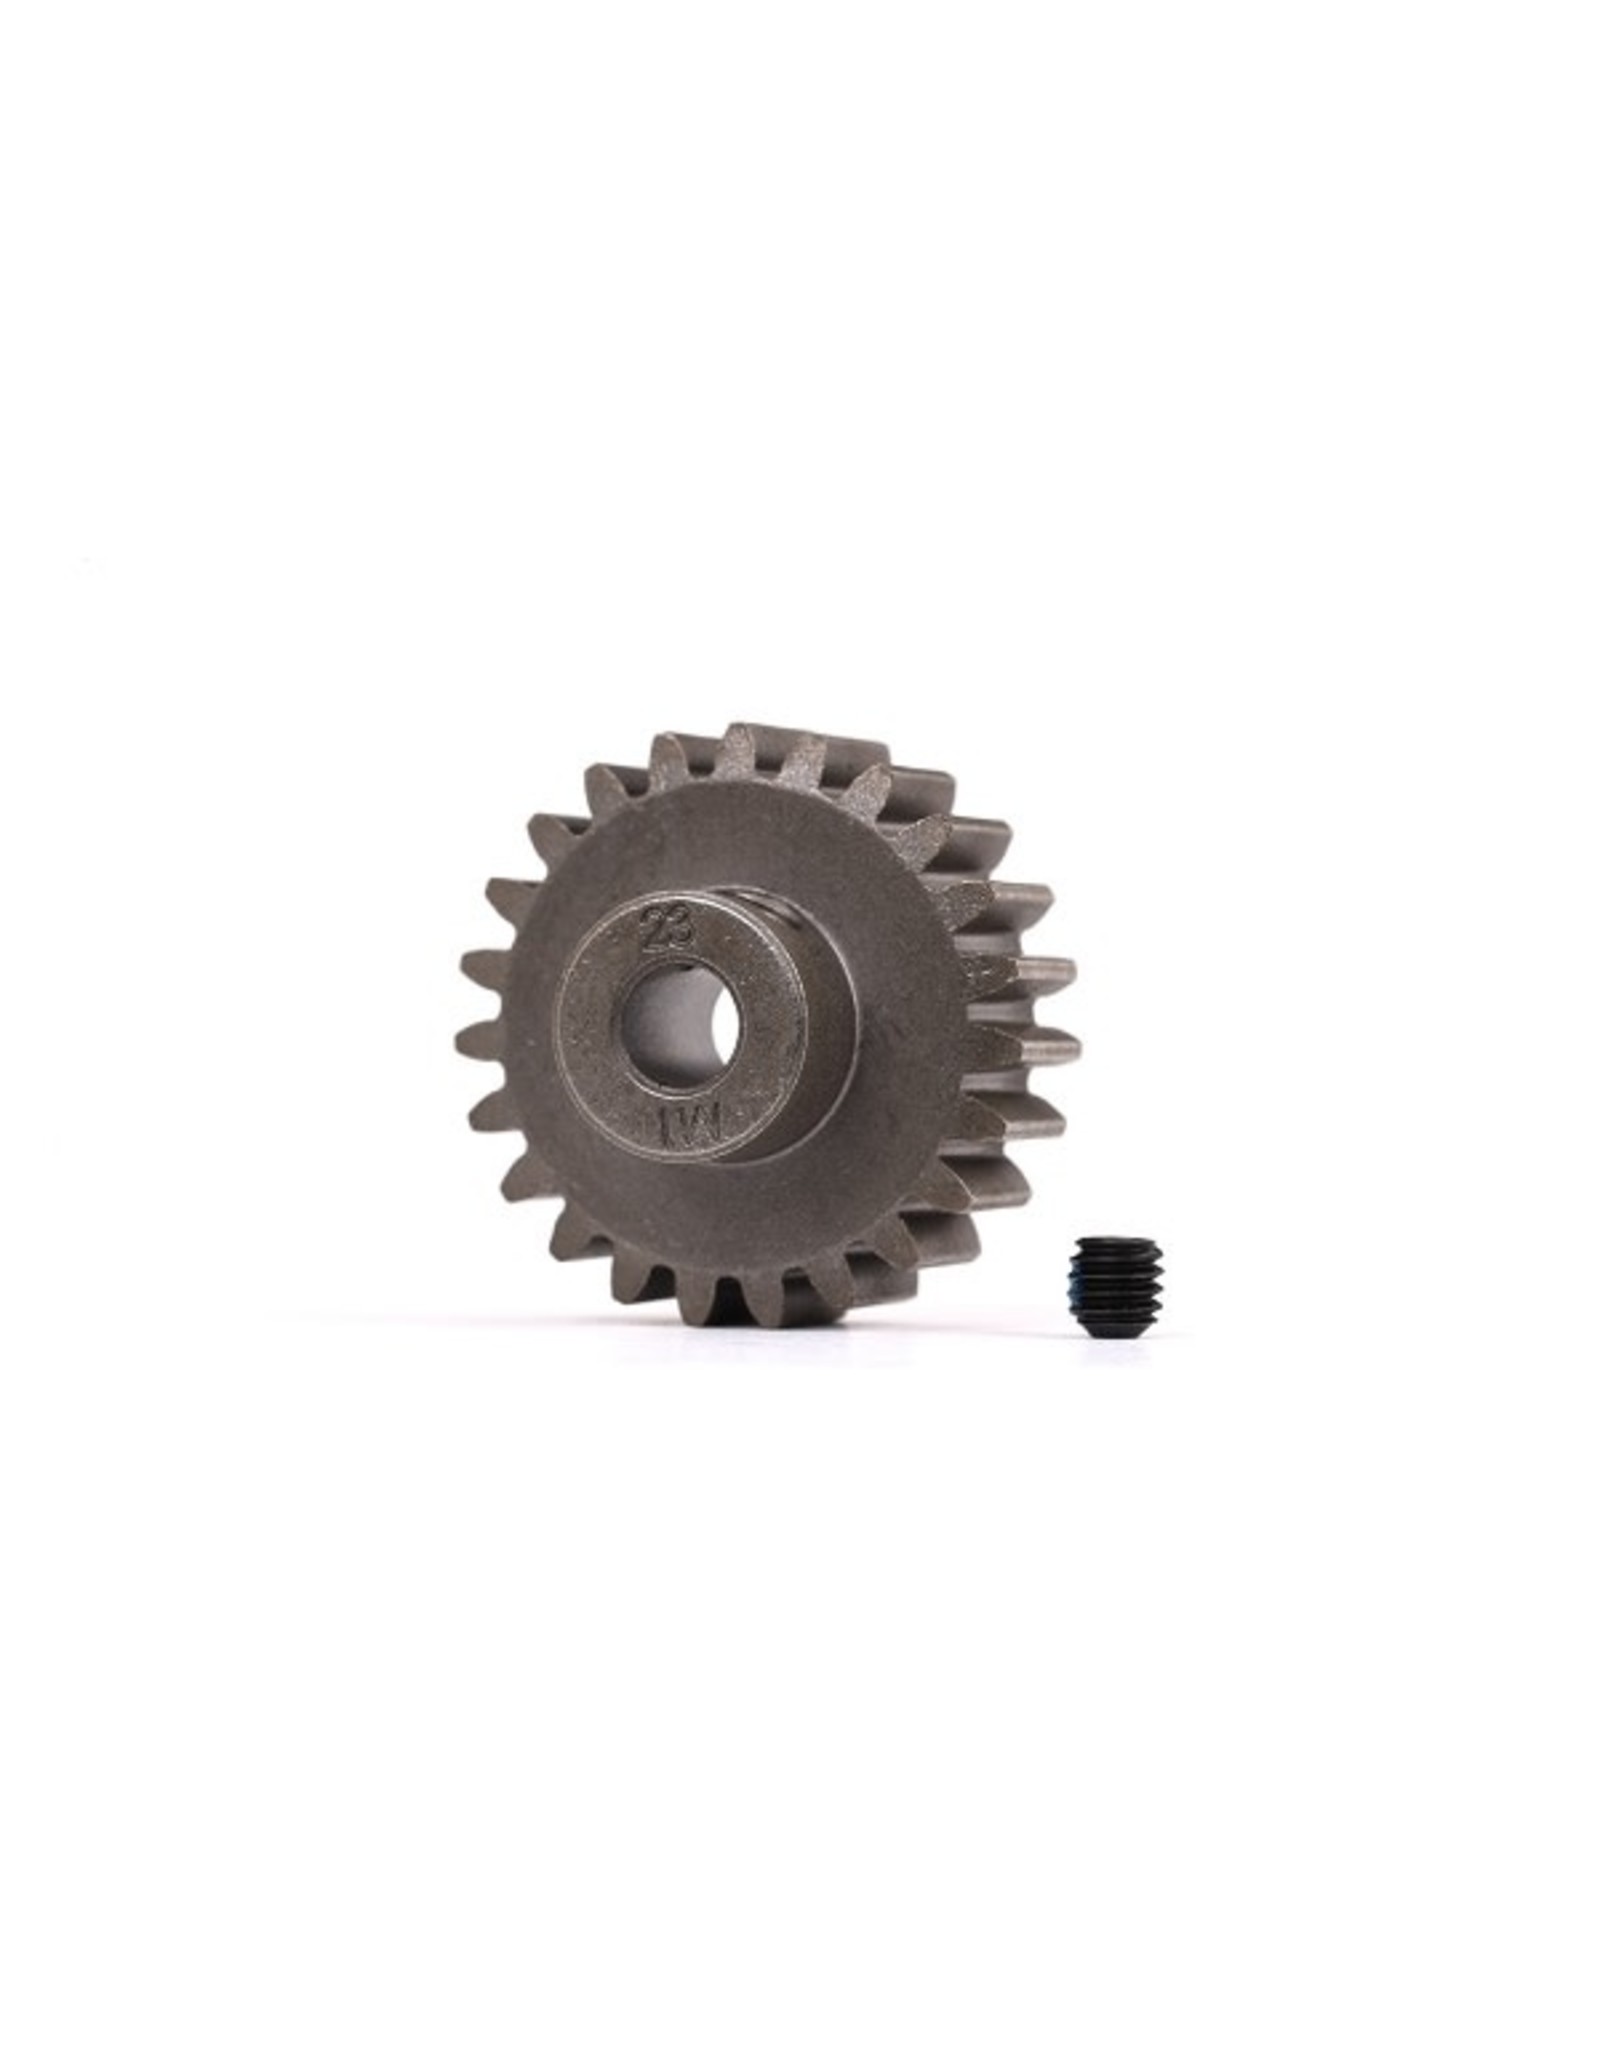 Traxxas Gear, 23-T pinion (1.0 metric pitch) (fits 5mm shaft)/ set screw (for use only with steel spur gears)